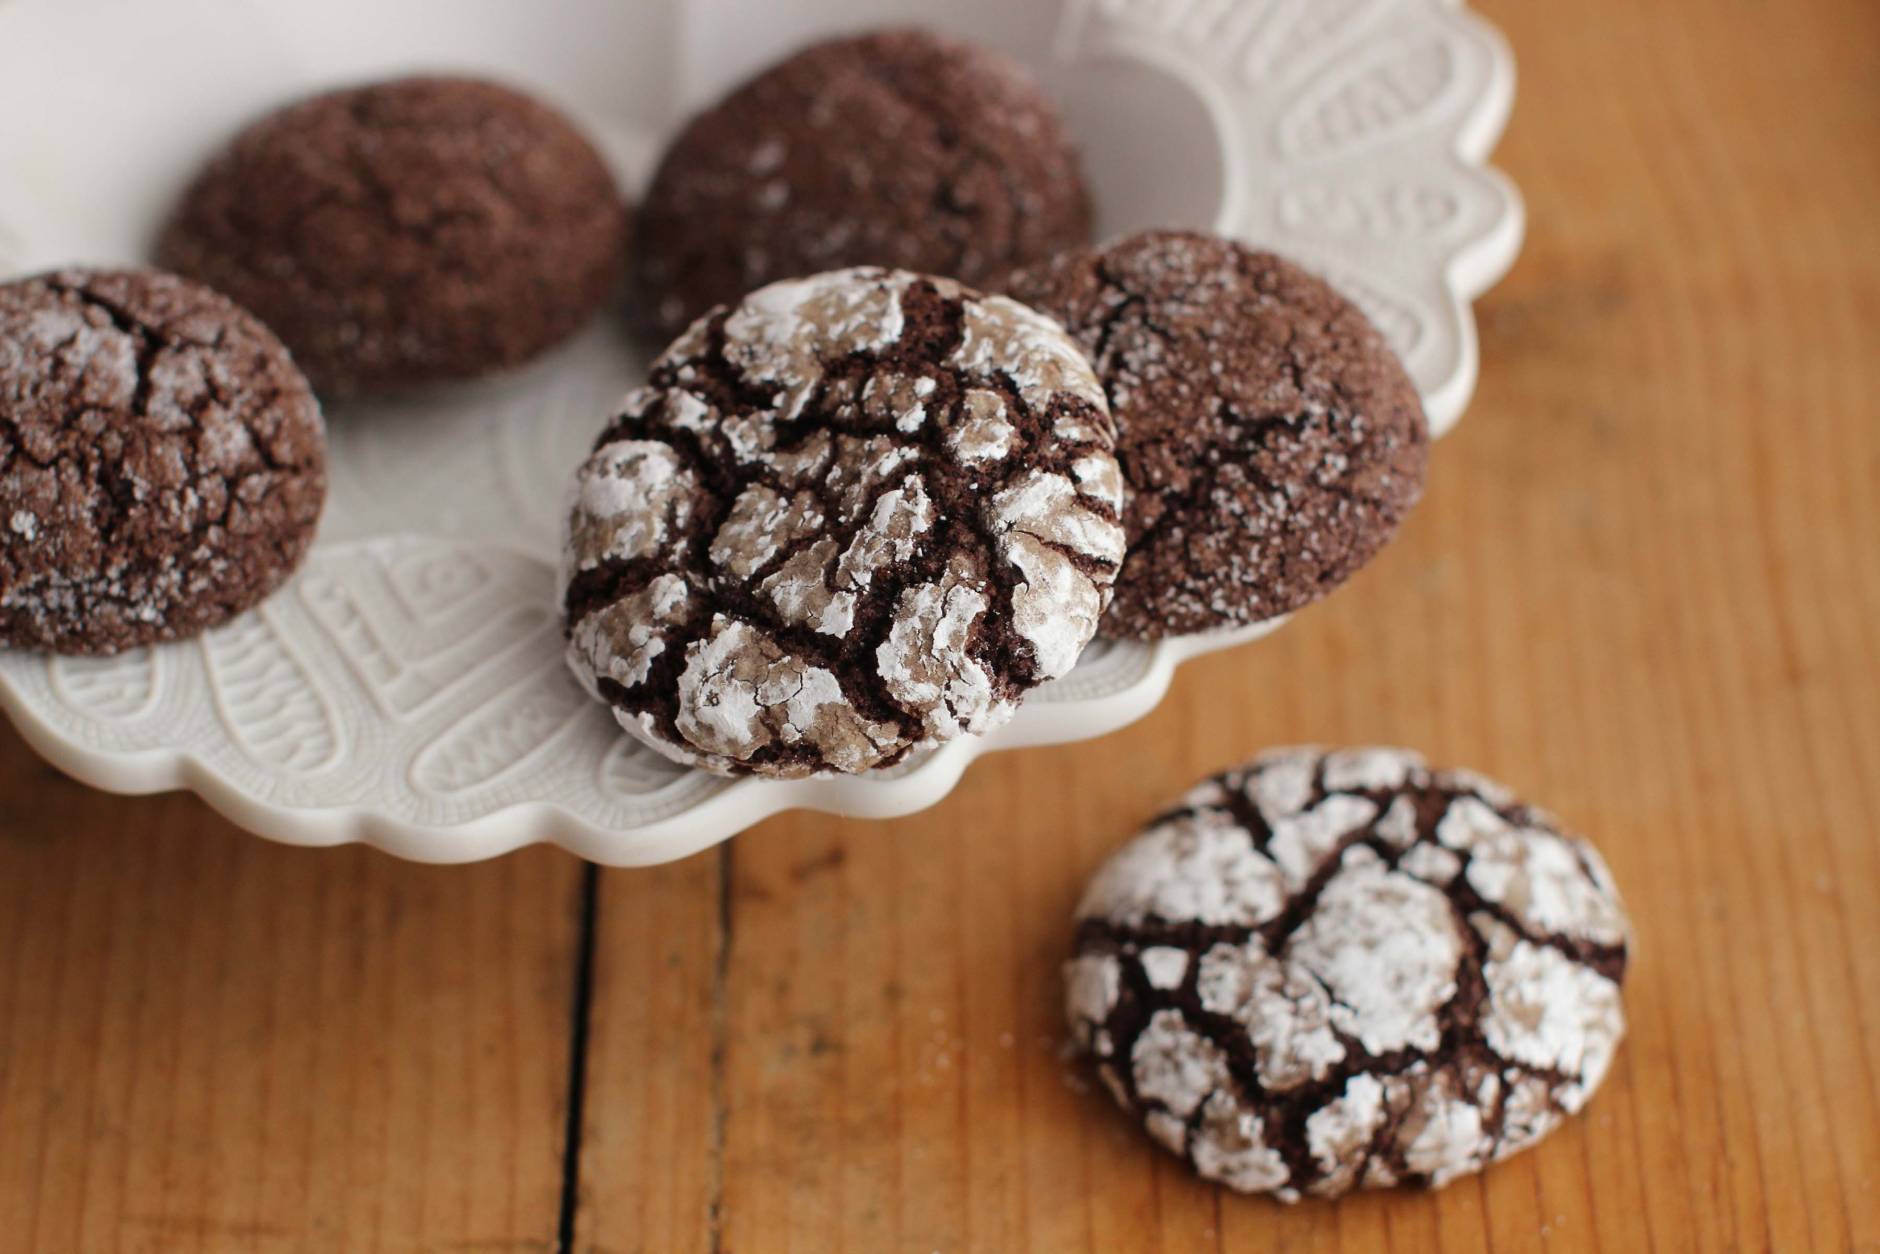 This Sept. 11, 2015 photo shows chocolate rye spice crinkles in Concord, N.H. These cookies are from a recipe by Alison Ladman. (AP Photo/Matthew Mead)